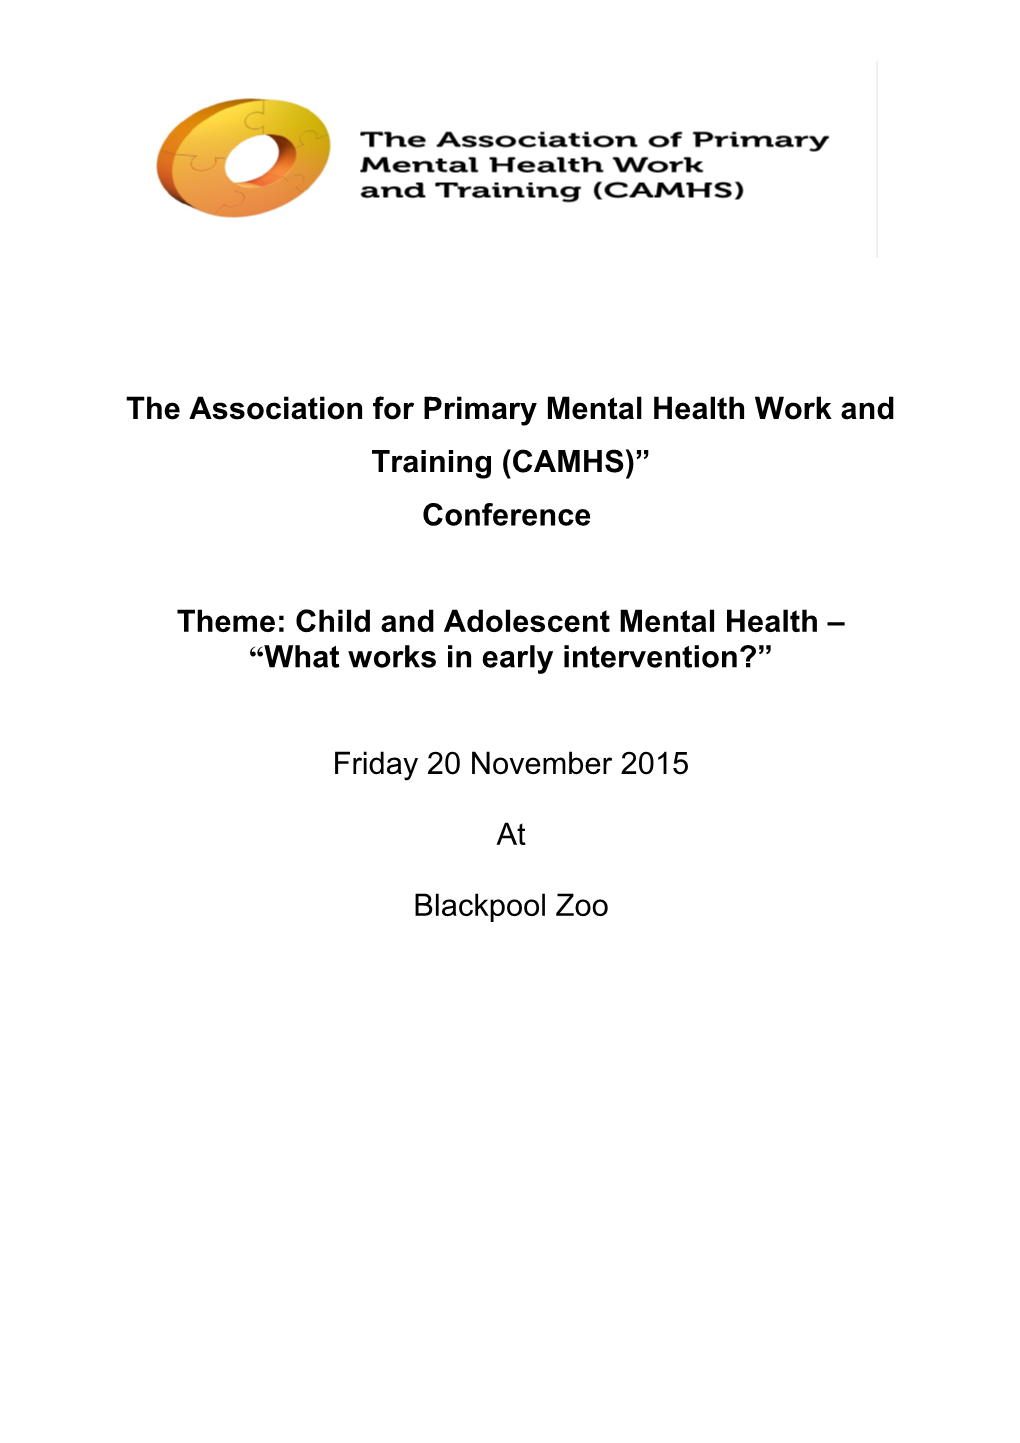 The Association for Primary Mental Health Work and Training (CAMHS)